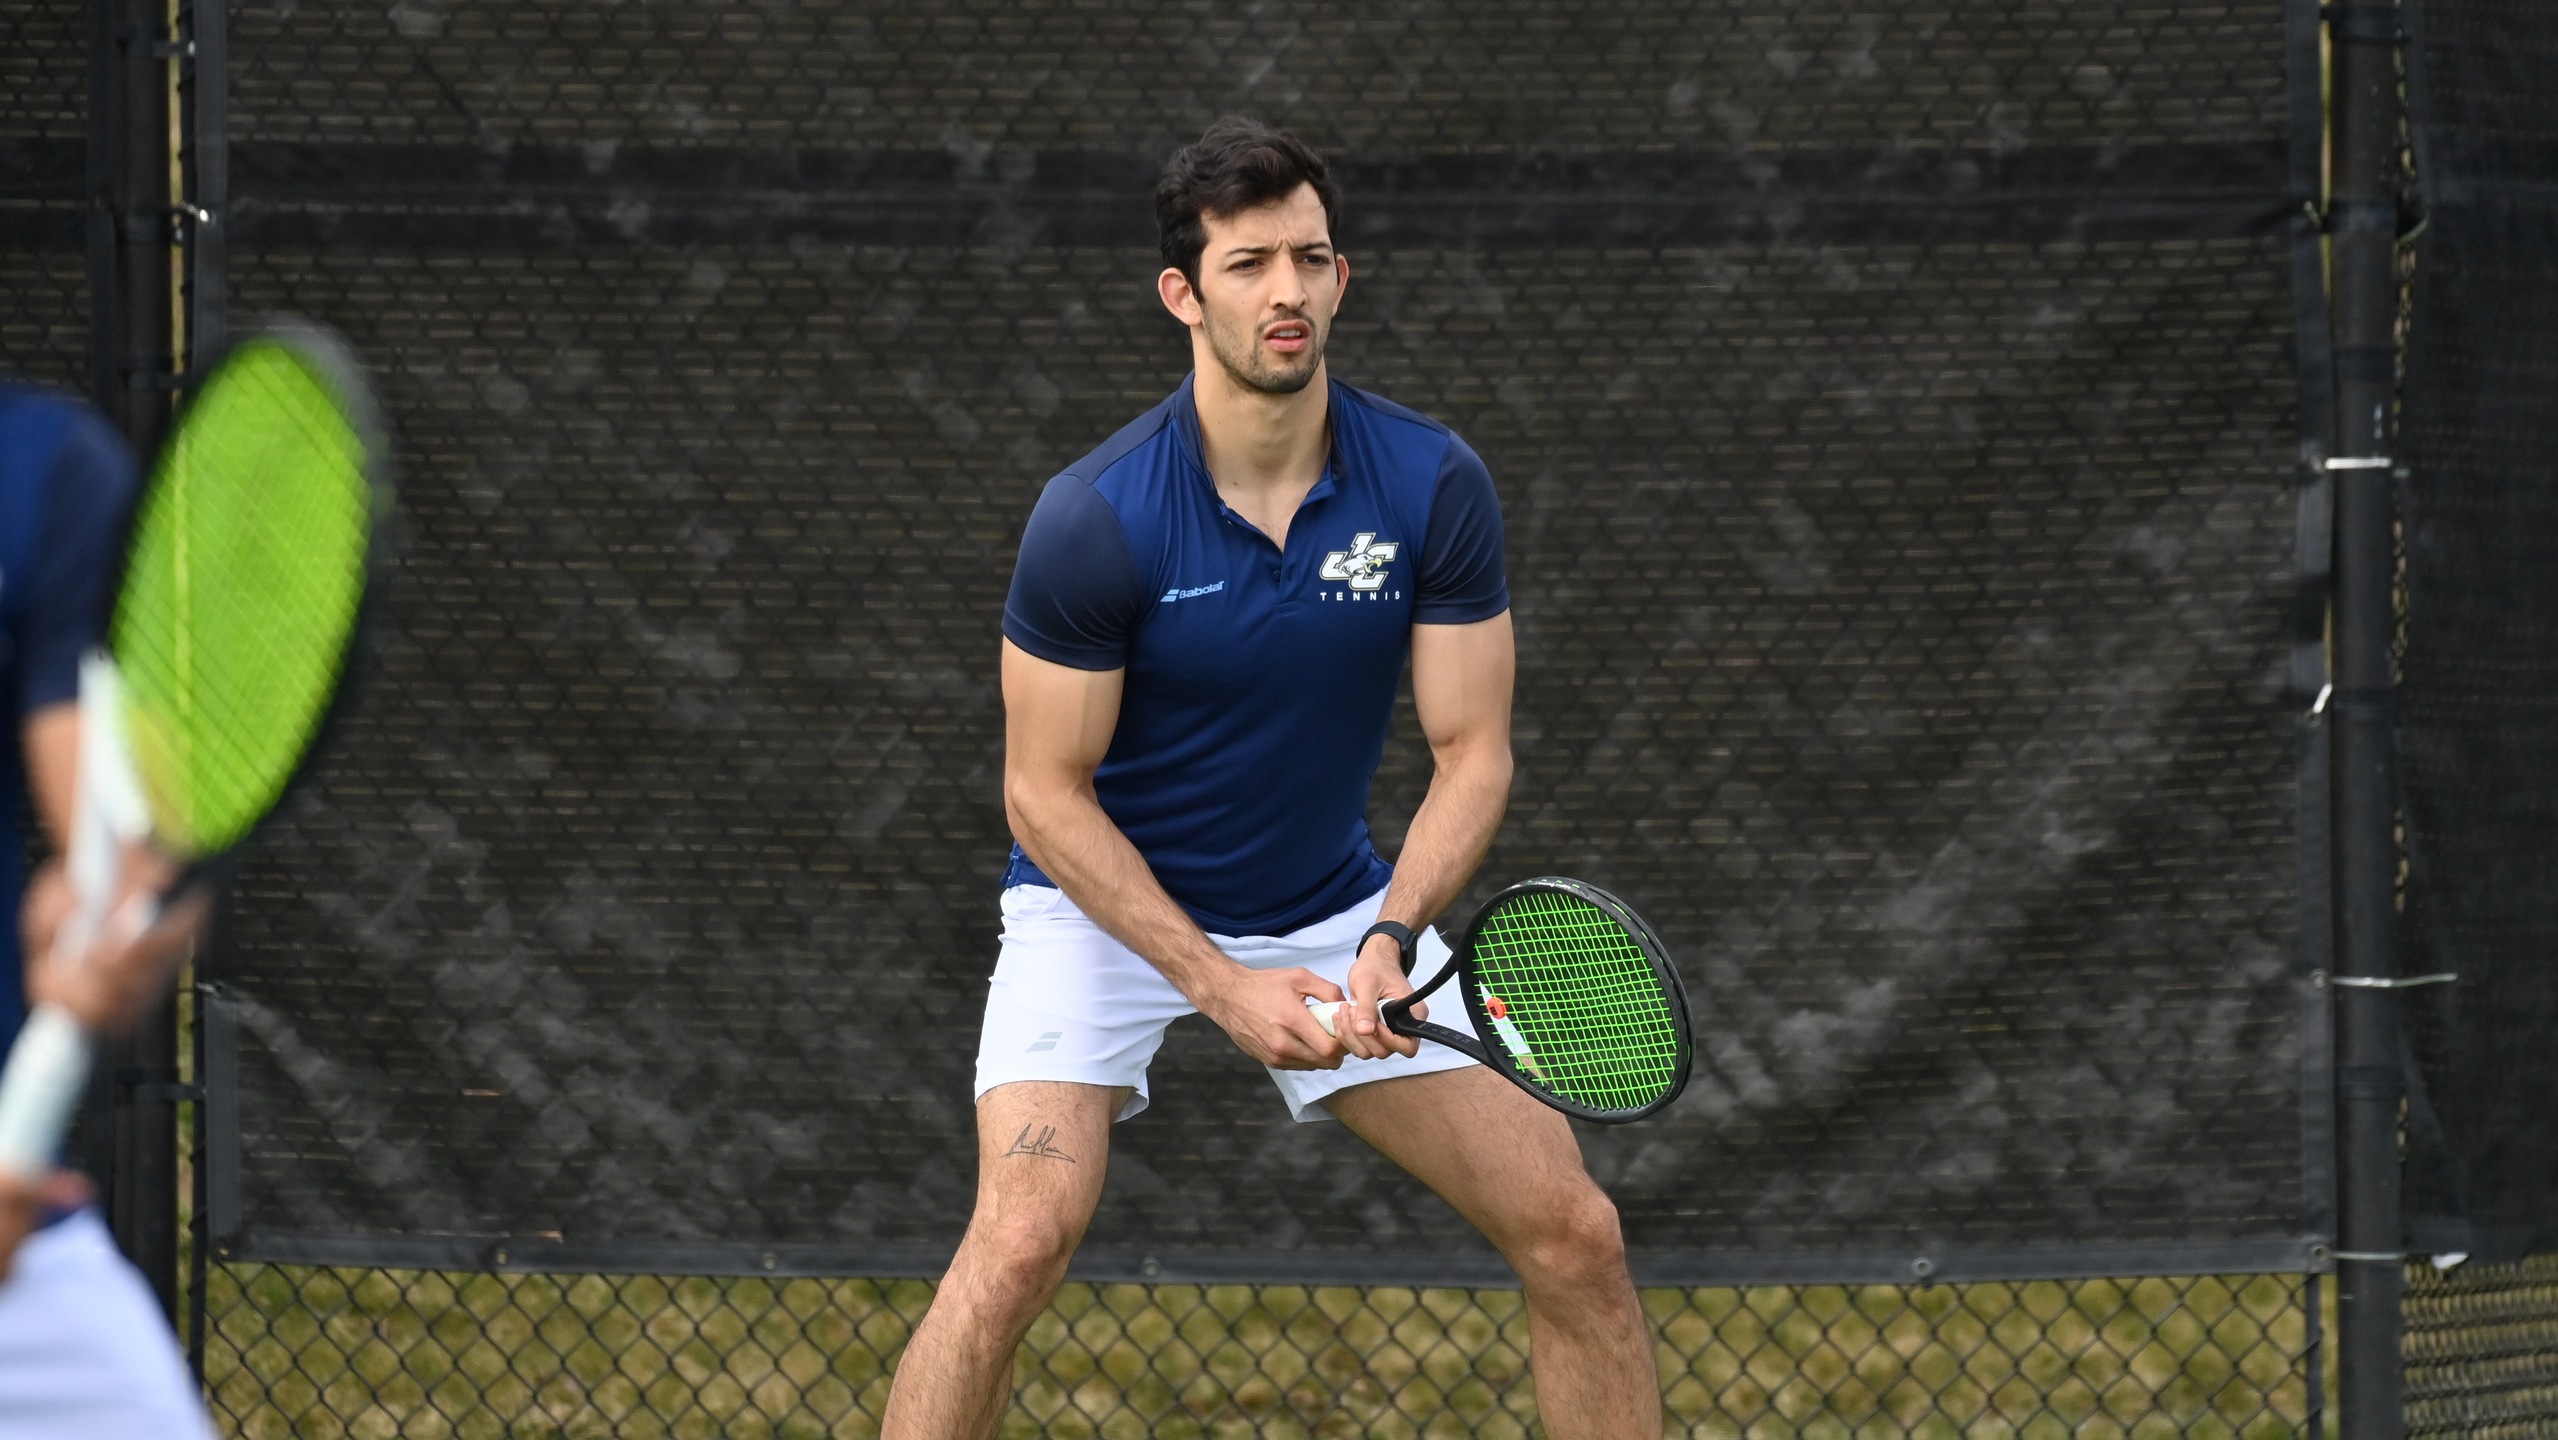 Munoz Remains Undefeated in Singles Play as Eagles Wrap Up Season